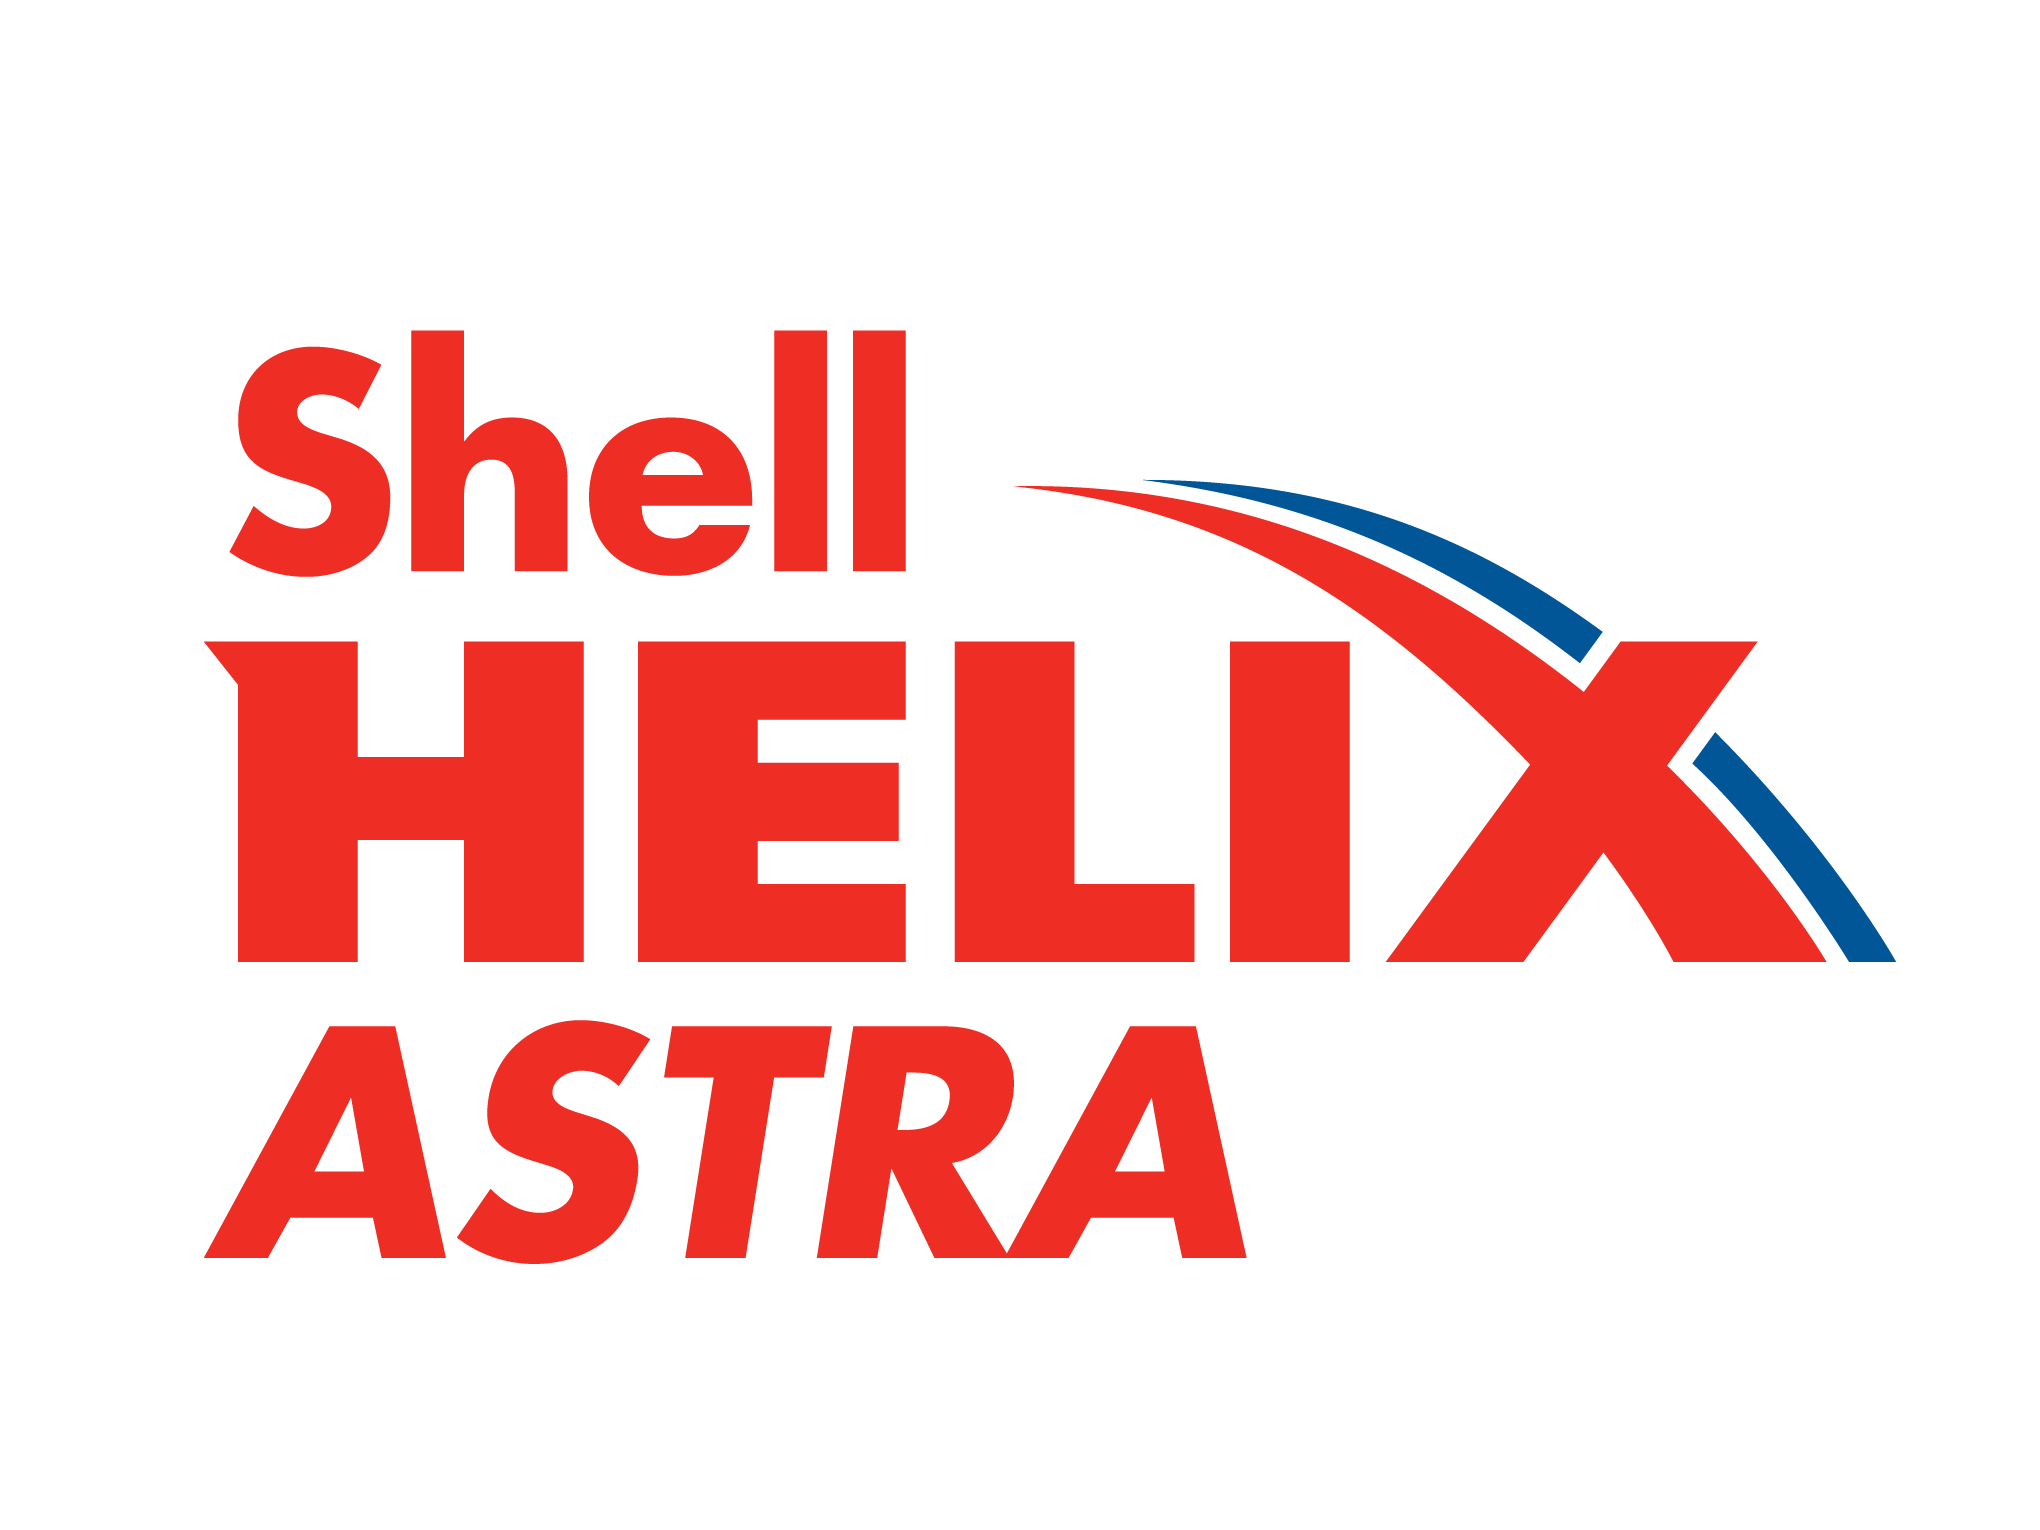 Shell Helix Astra